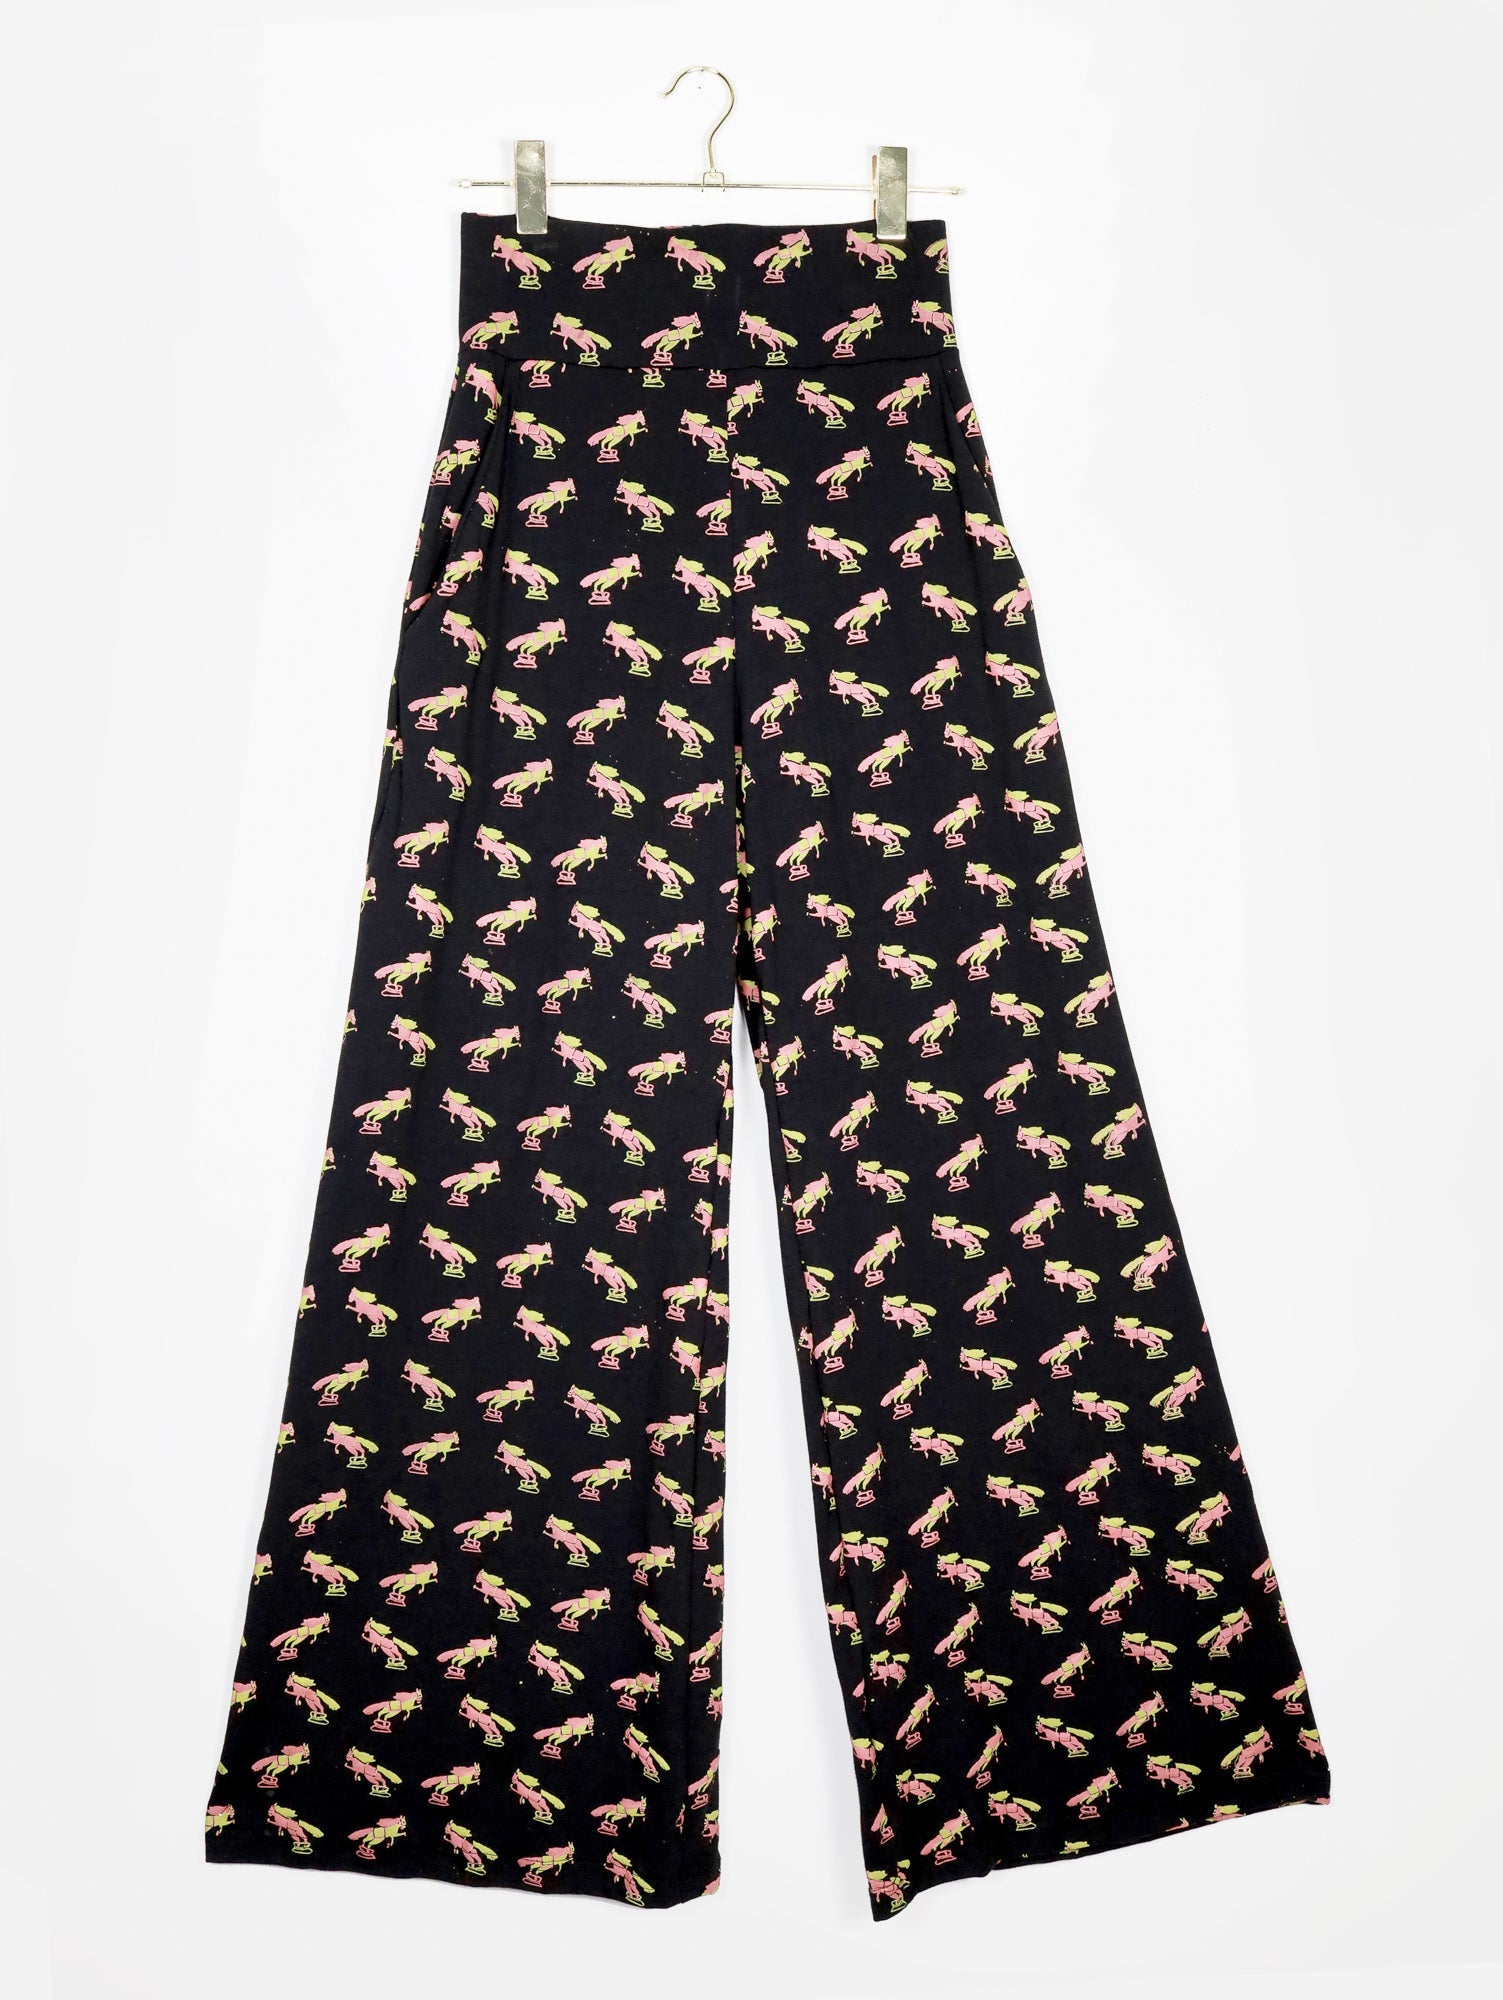 Black Trophy High Waisted Wide Leg Pants - Thief and Bandit